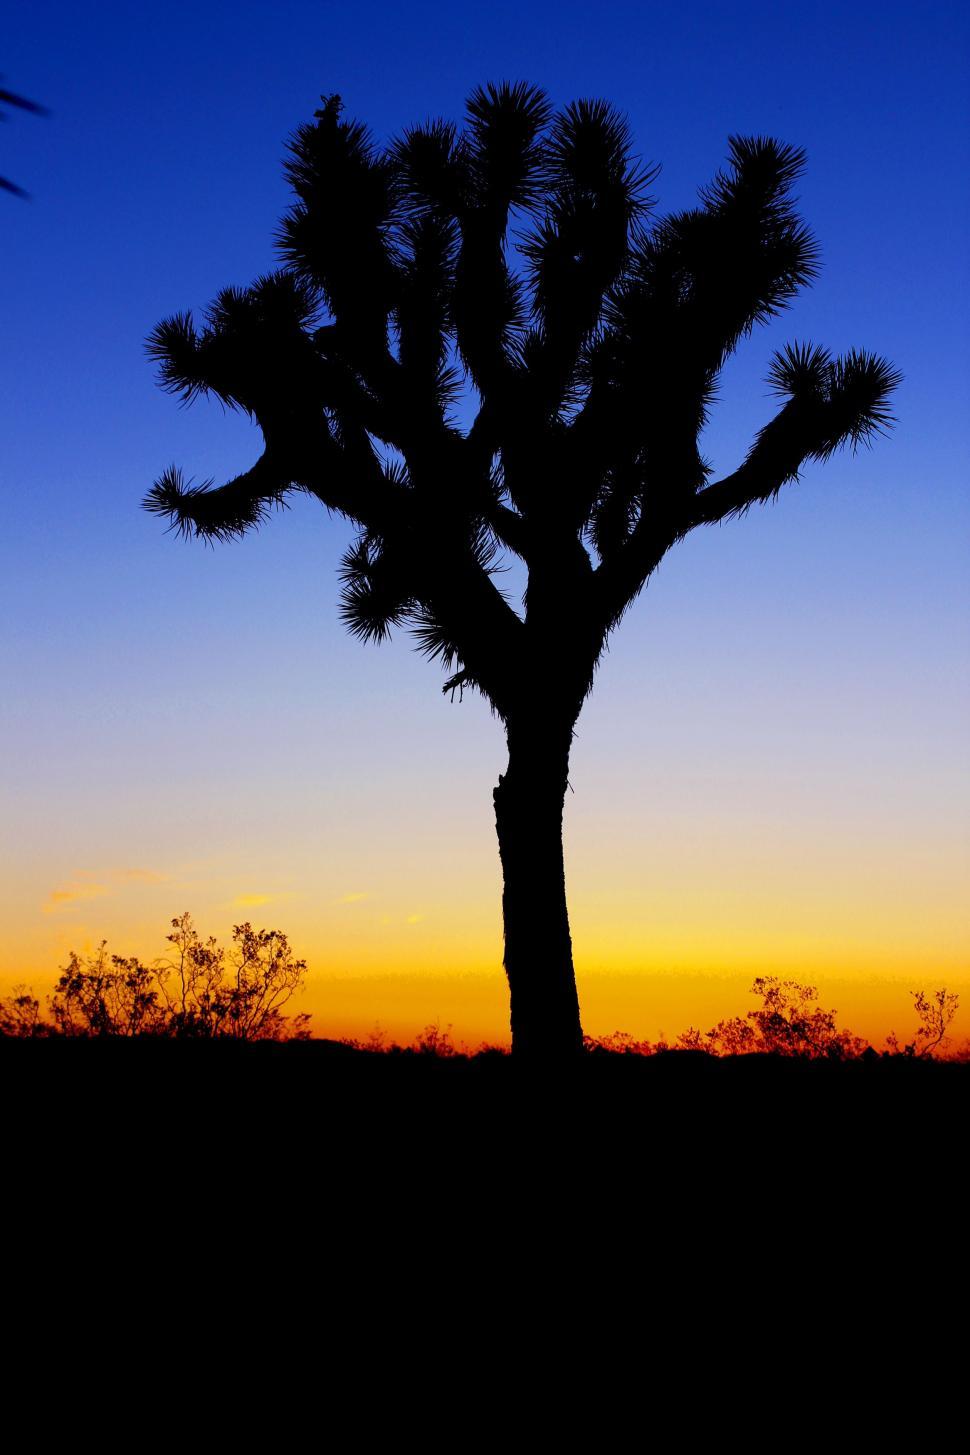 Free Image of Joshua Tree Silhouetted Against Sunset Sky 